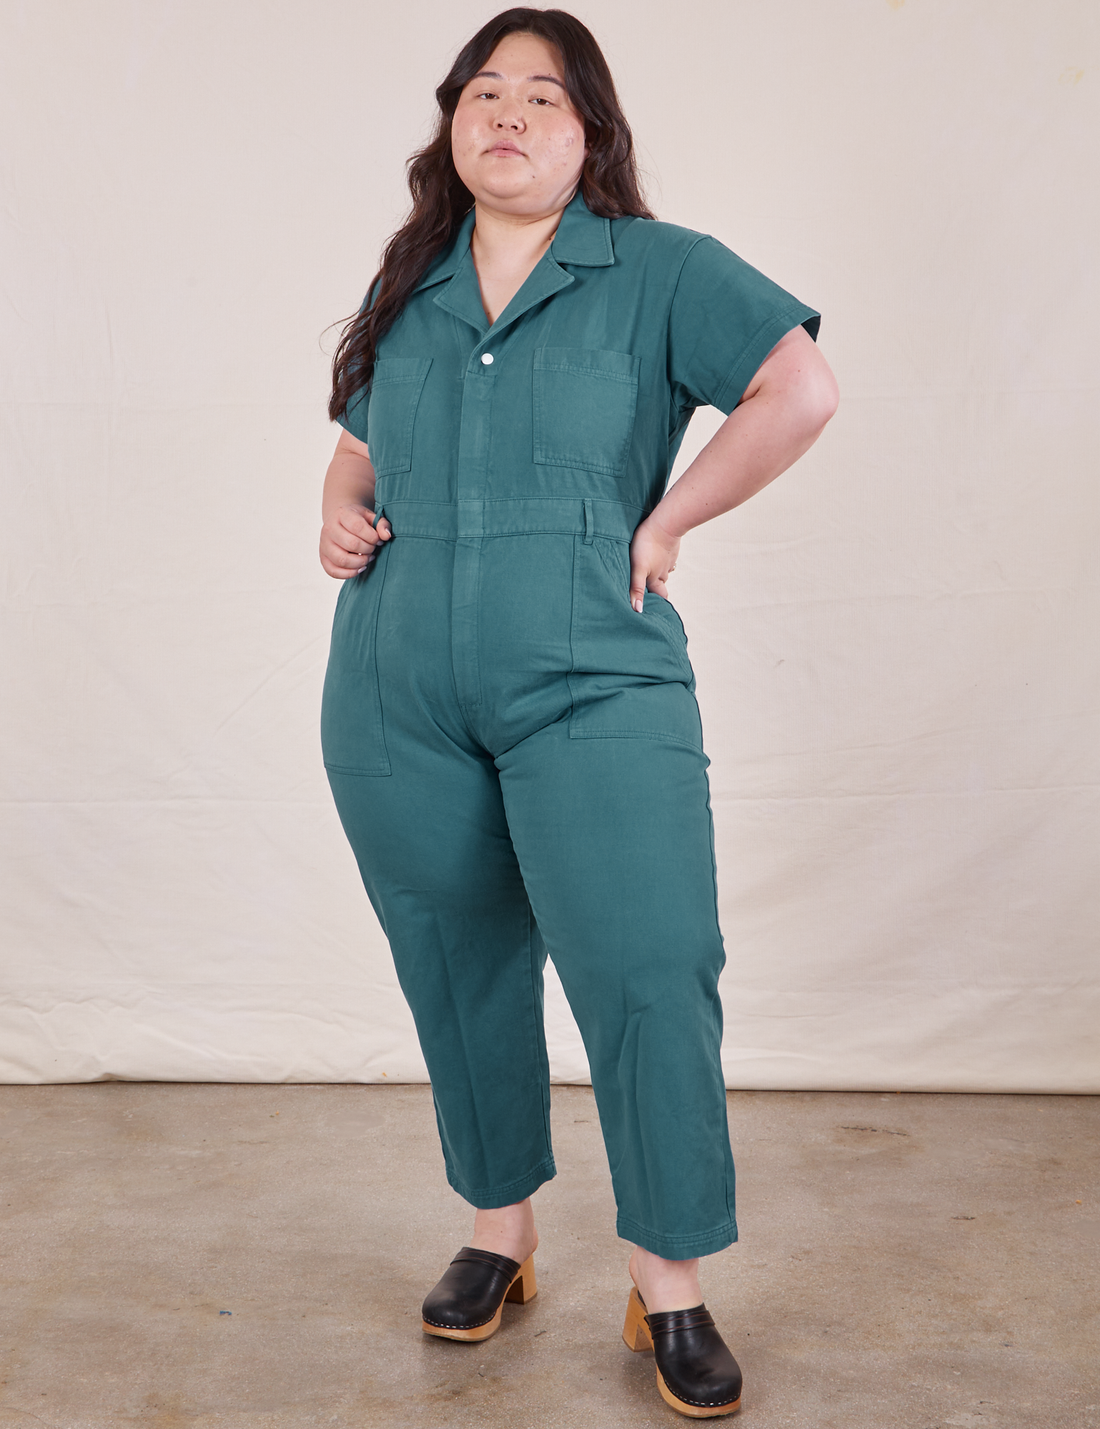 Ashley is 5’7” and wearing 1XL Petite Short Sleeve Jumpsuit in Marine Blue